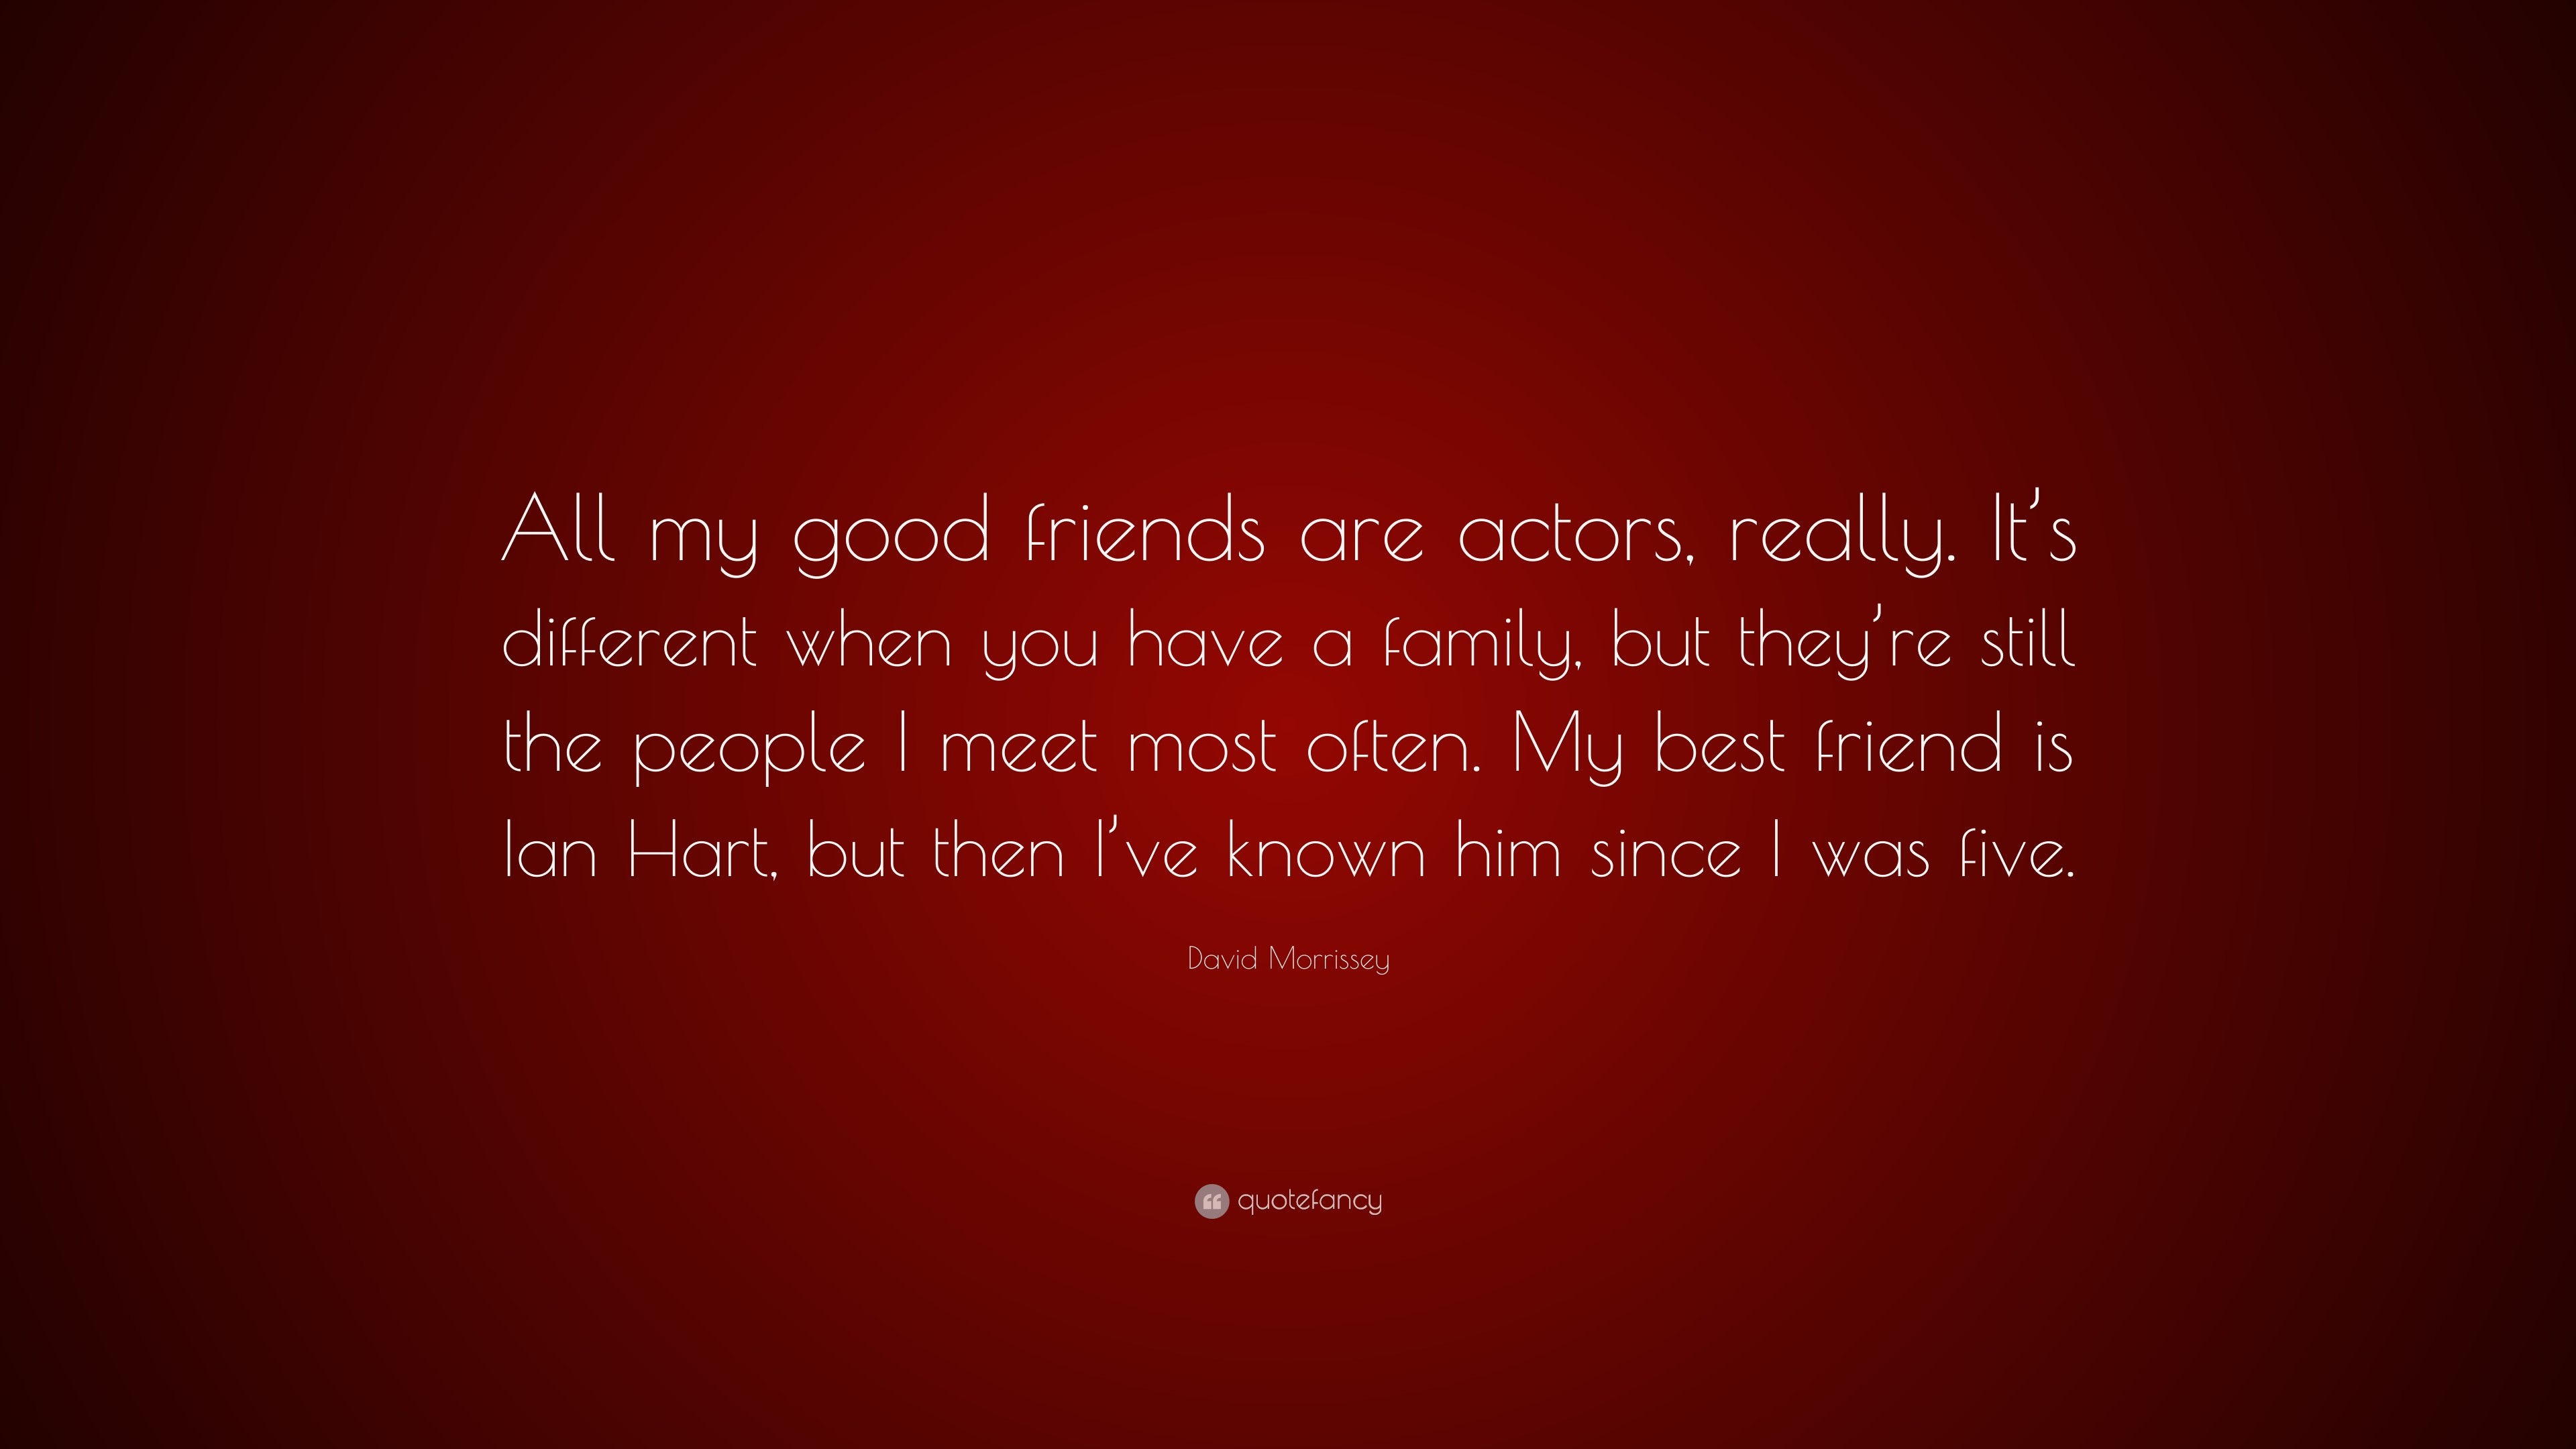 3840x2160 David Morrissey Quote: “All my good friends are actors, really. It's  different